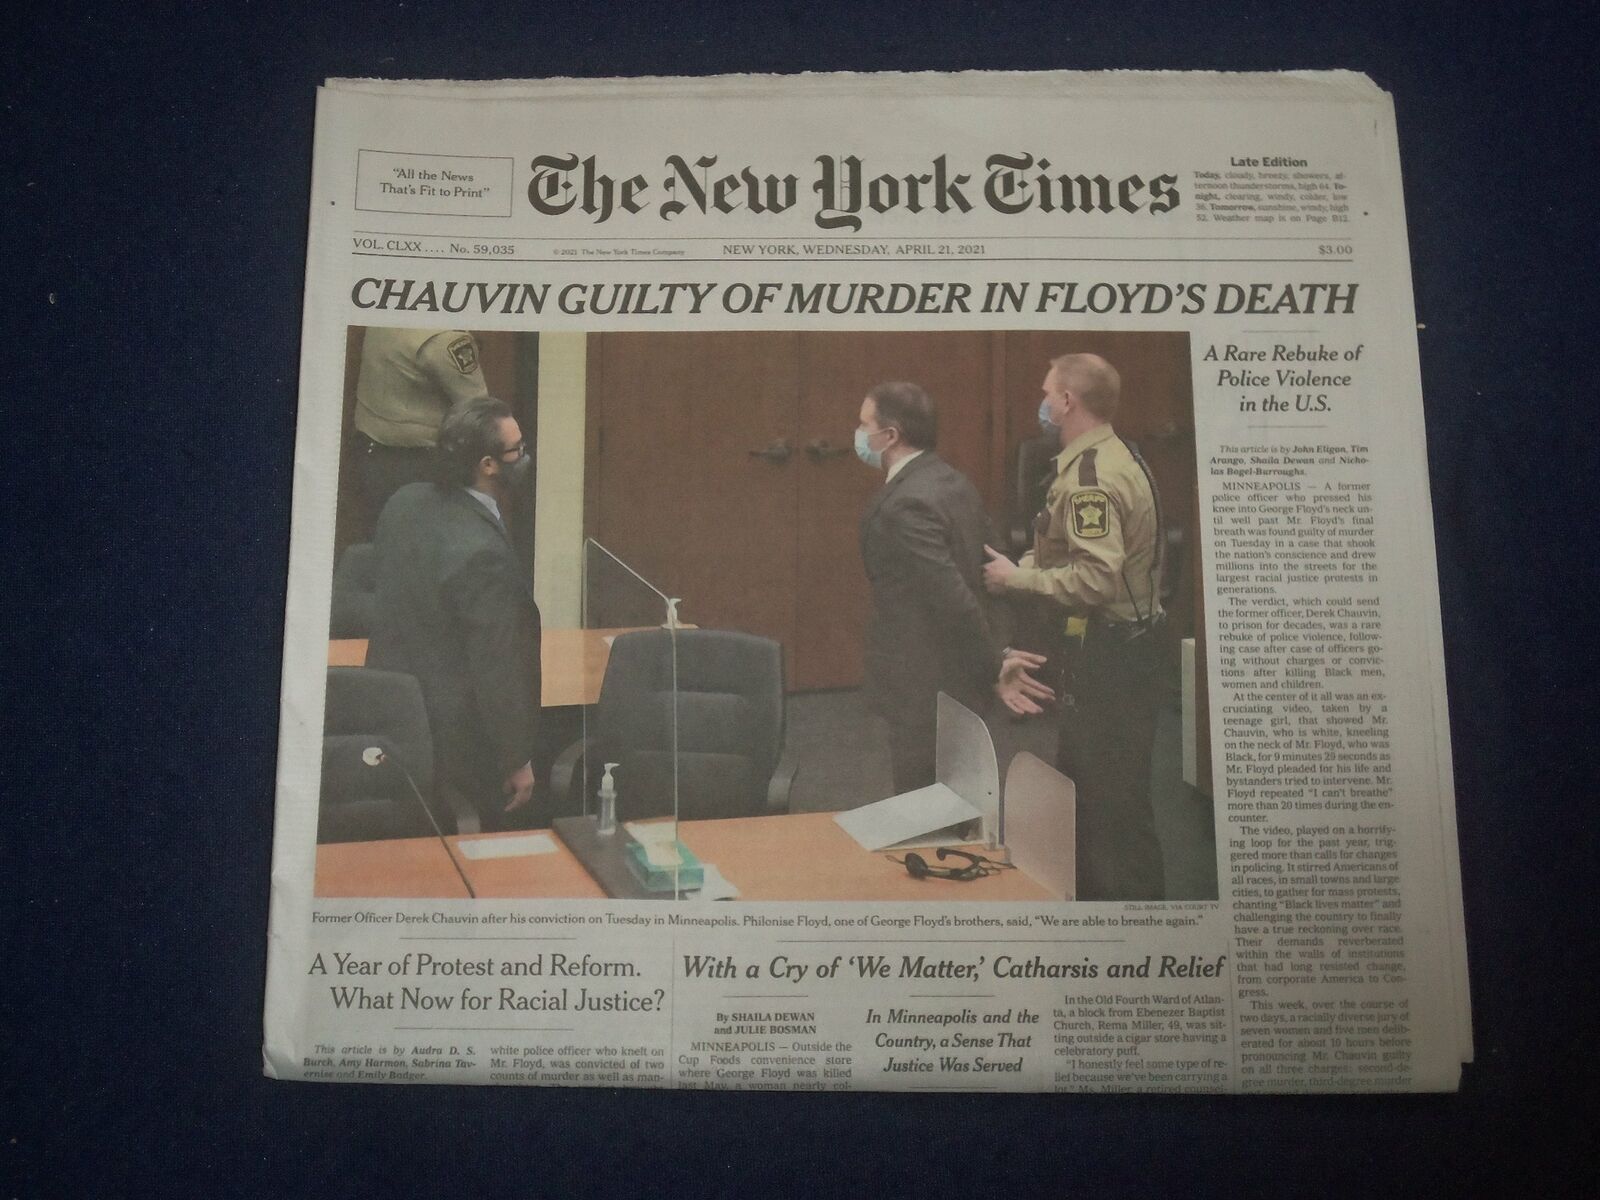 2021 APRIL 21 NEW YORK TIMES - CHAUVIN GUILTY OF MURDER IN GEORGE FLOYD'S DEATH